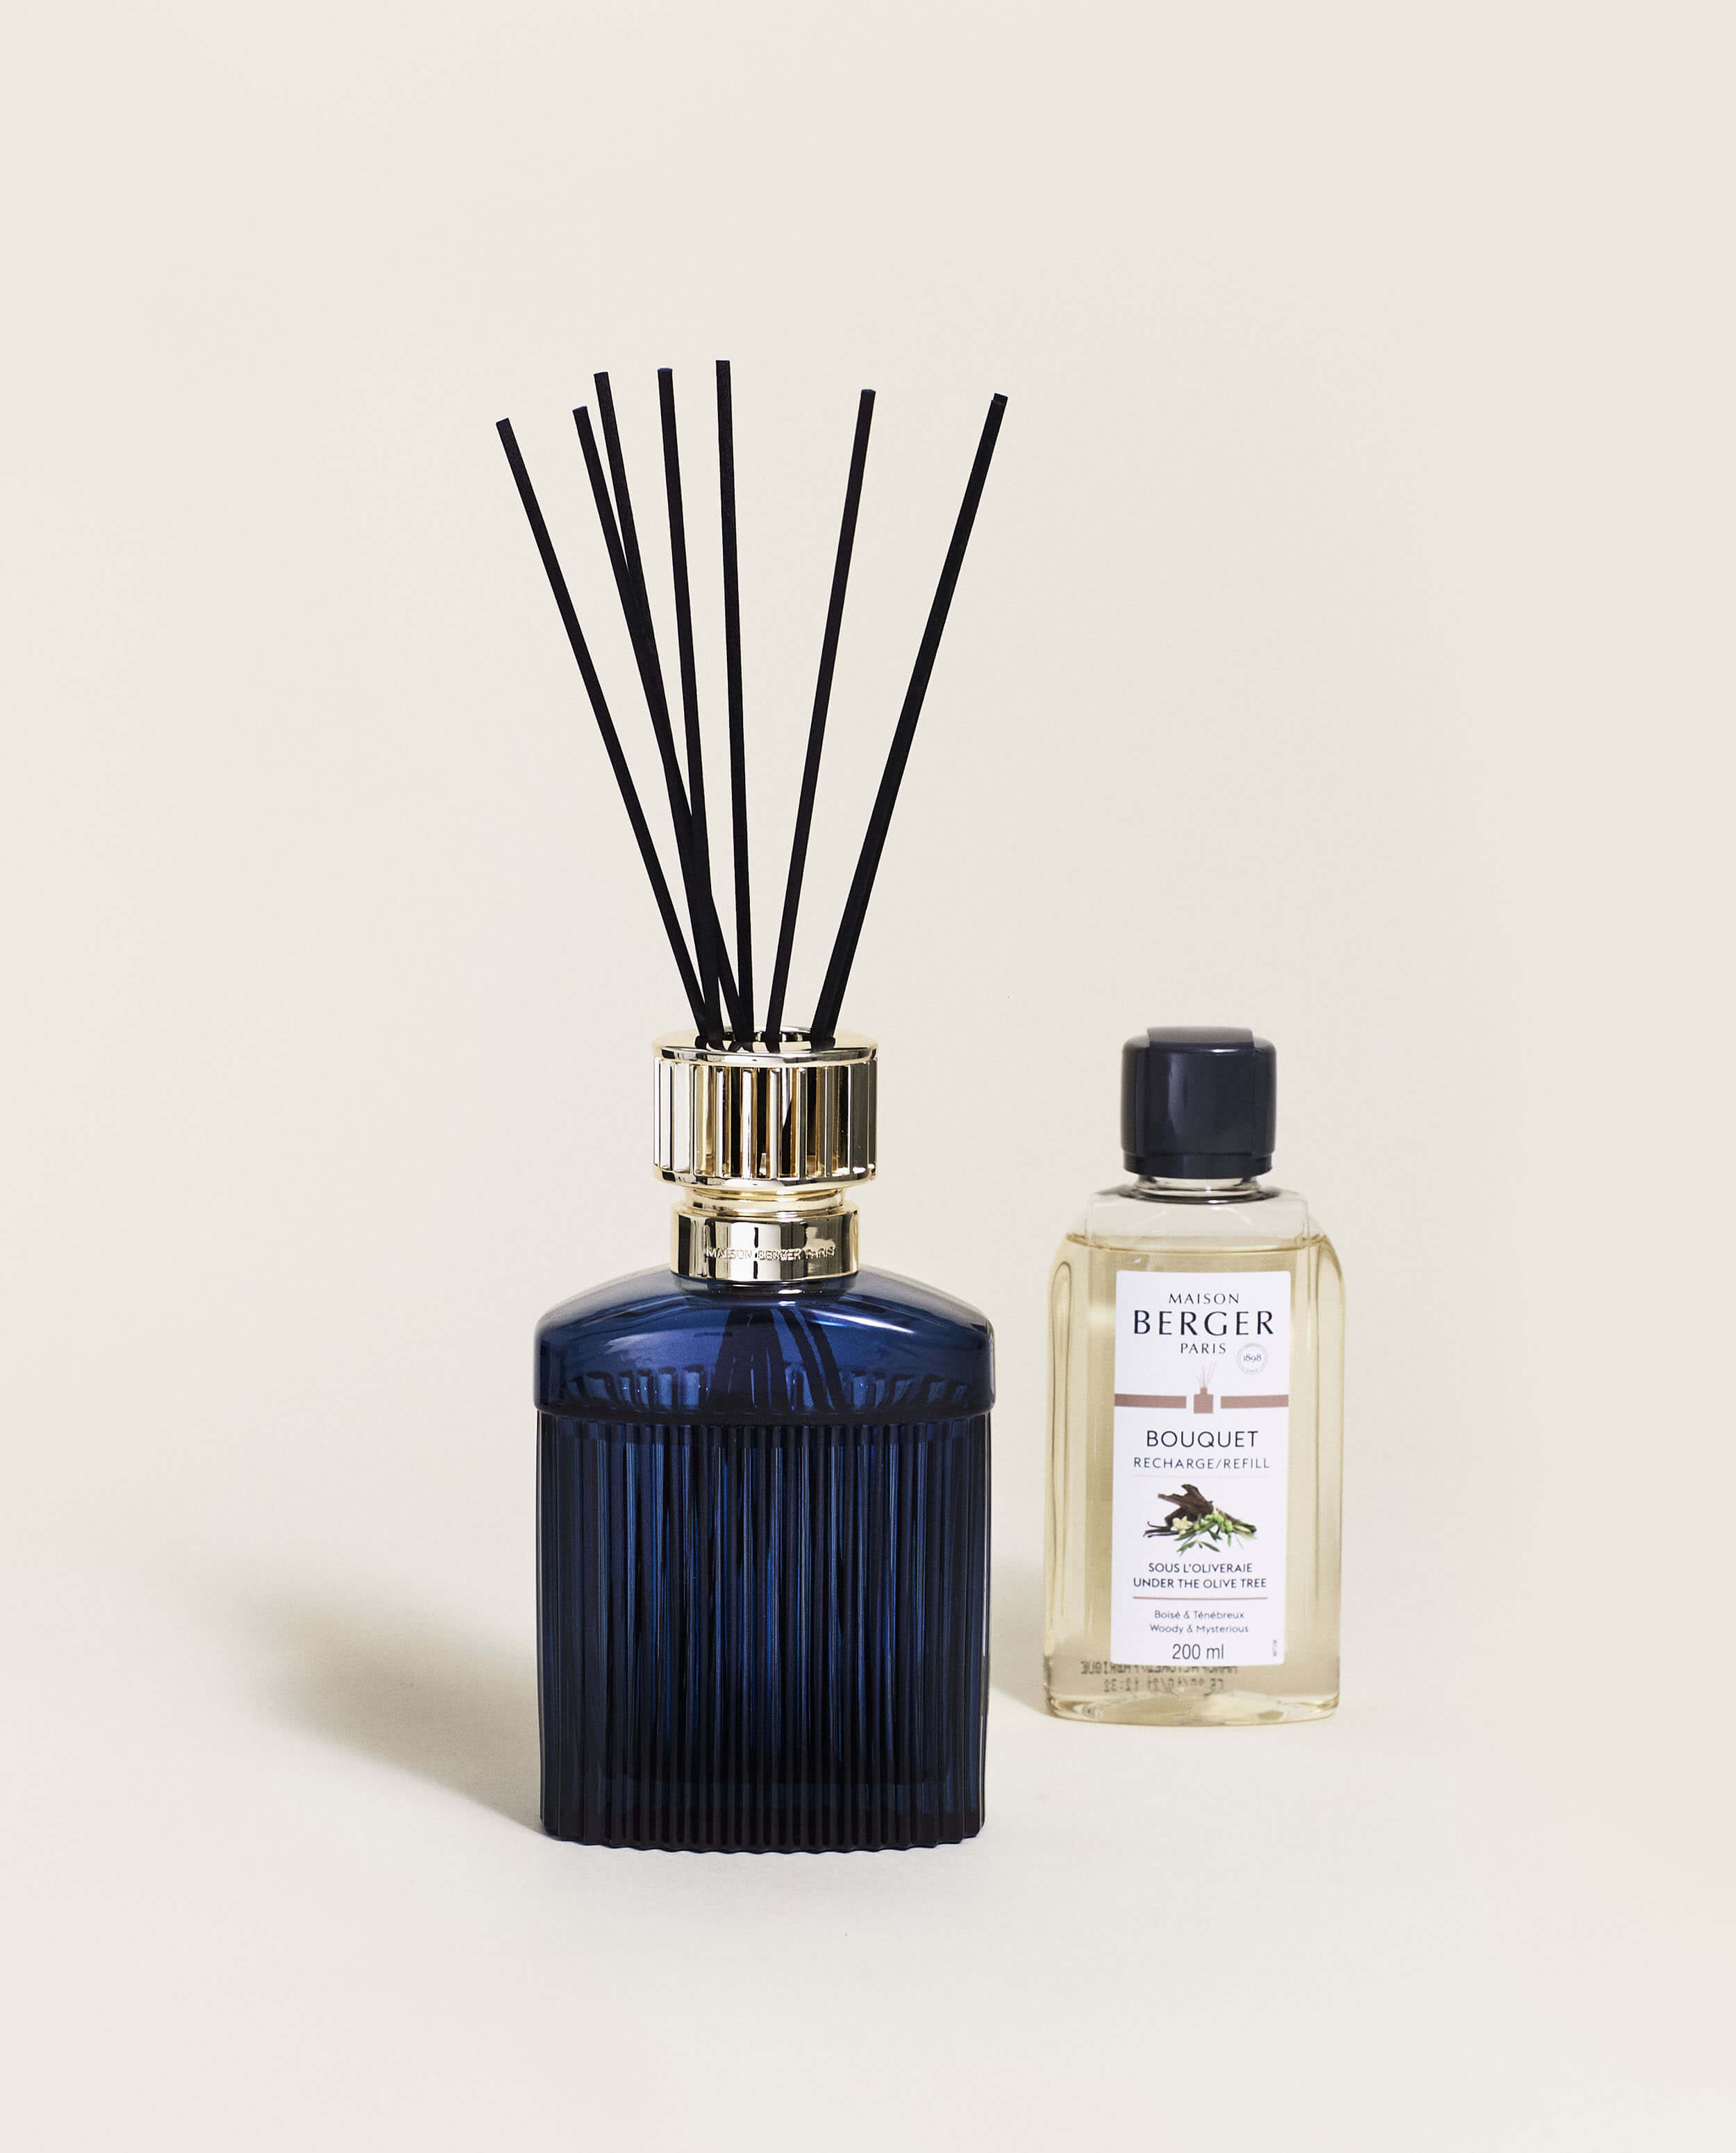  Lampe Berger Giftset Winter - Home Fragrance Diffuser